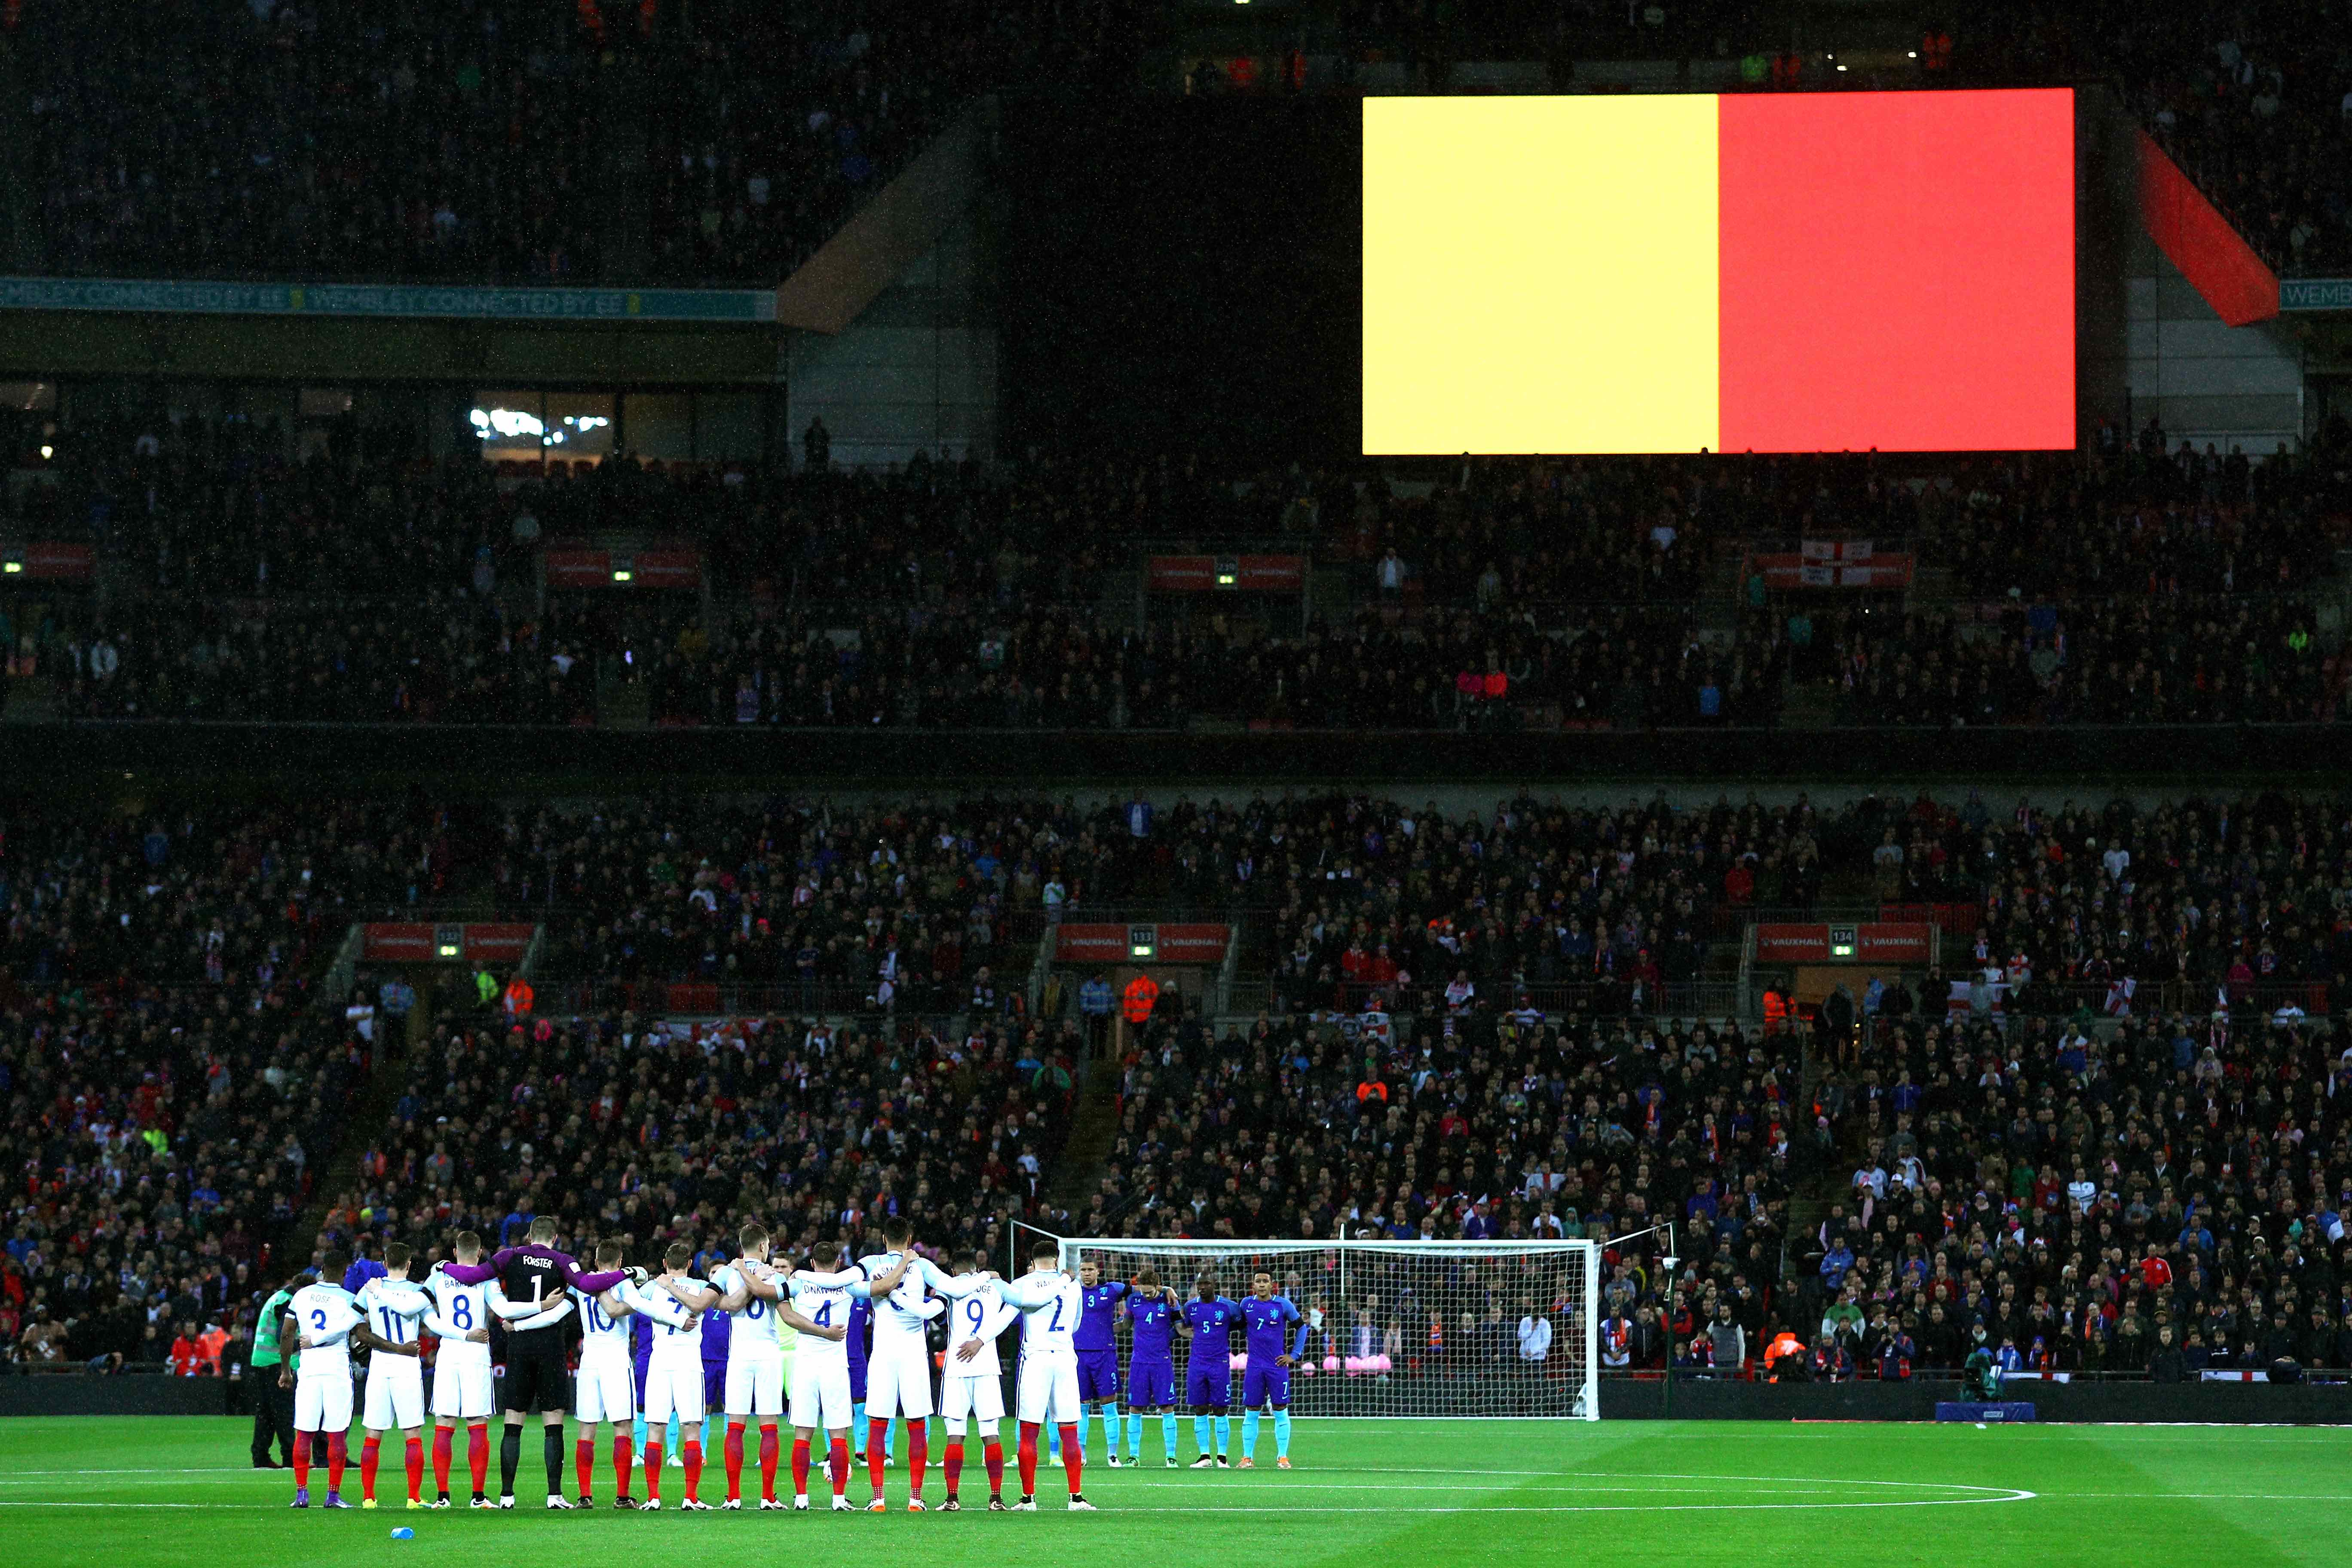 LONDON, ENGLAND - MARCH 29:  England and Netherlands players observe a minute of silence for the victims of Brussels terror attacks as the Belgium flag is shown on big screen prior to the International Friendly match between England and Netherlands at Wembley Stadium on March 29, 2016 in London, England.  (Photo by Paul Gilham/Getty Images)